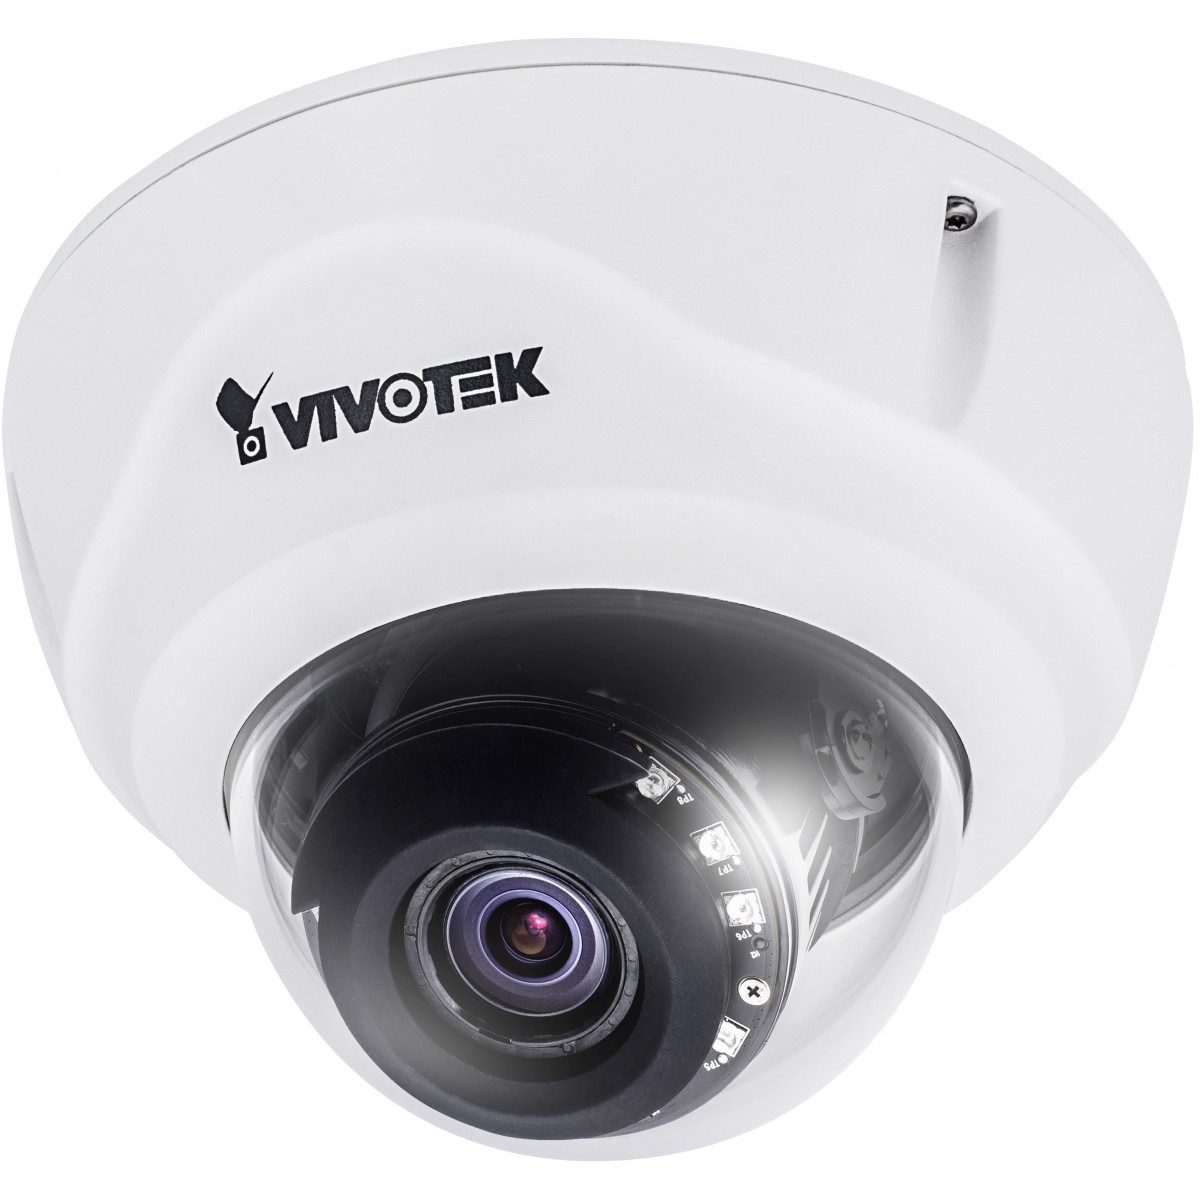 VIVOTEK FD836BA-HTV - IP security camera - Outdoor - Wired - CE - LVD - FCC Class A - VCCI - C-Tick - UL - Dome - Ceiling/Wall